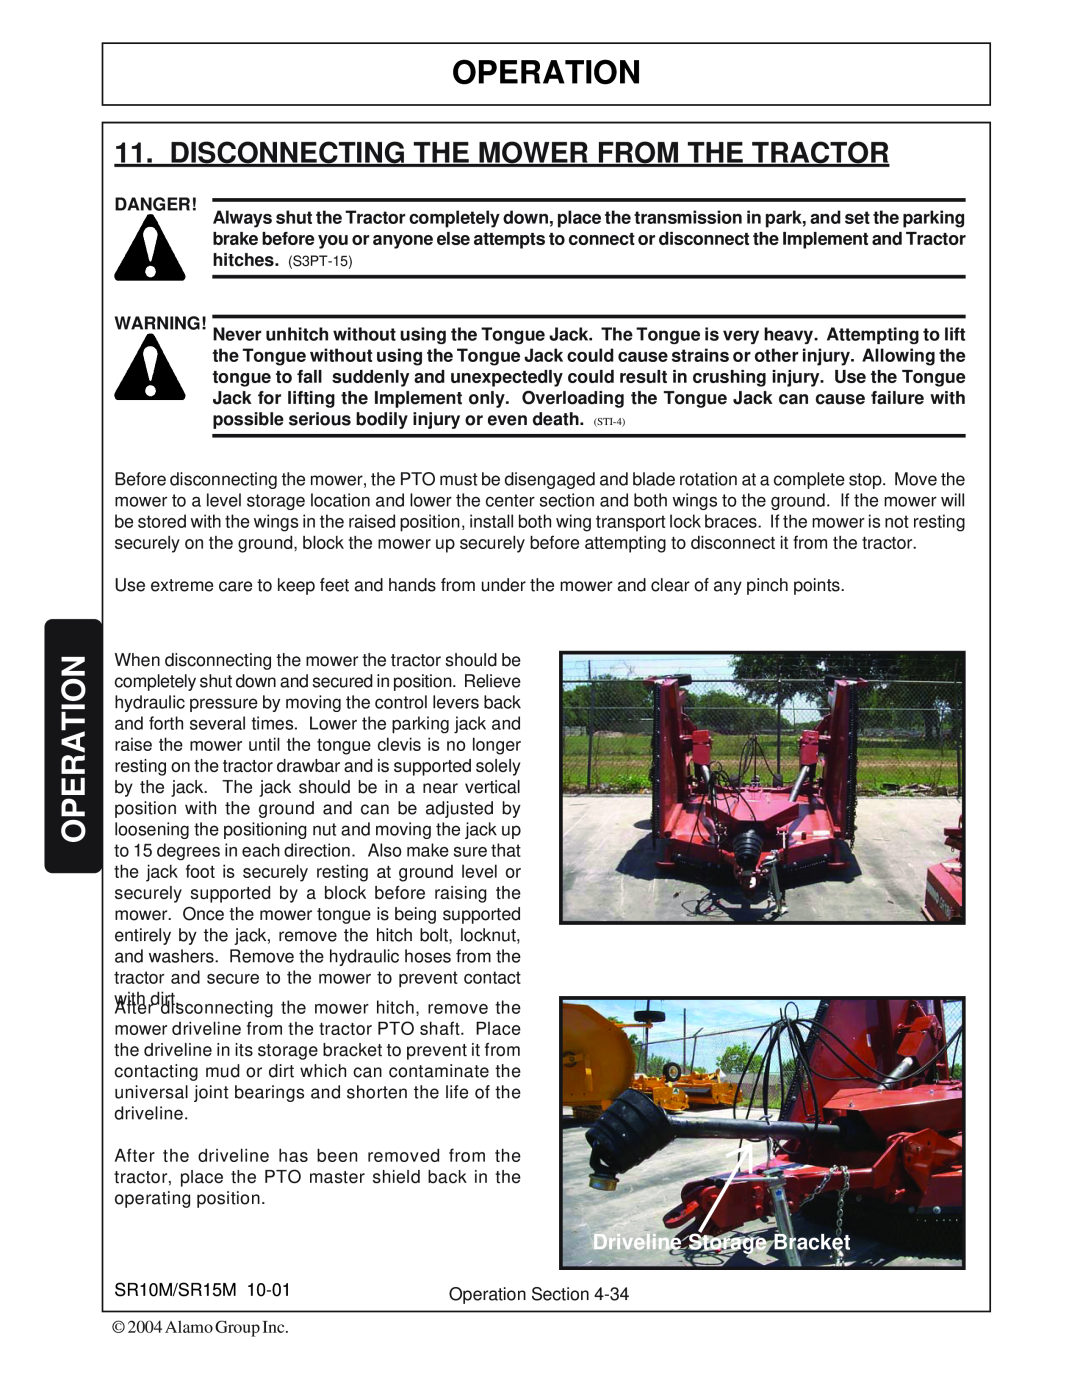 Servis-Rhino SR10M, SR15M manual Disconnecting The Mower From The Tractor, Operation, Driveline Storage Bracket 